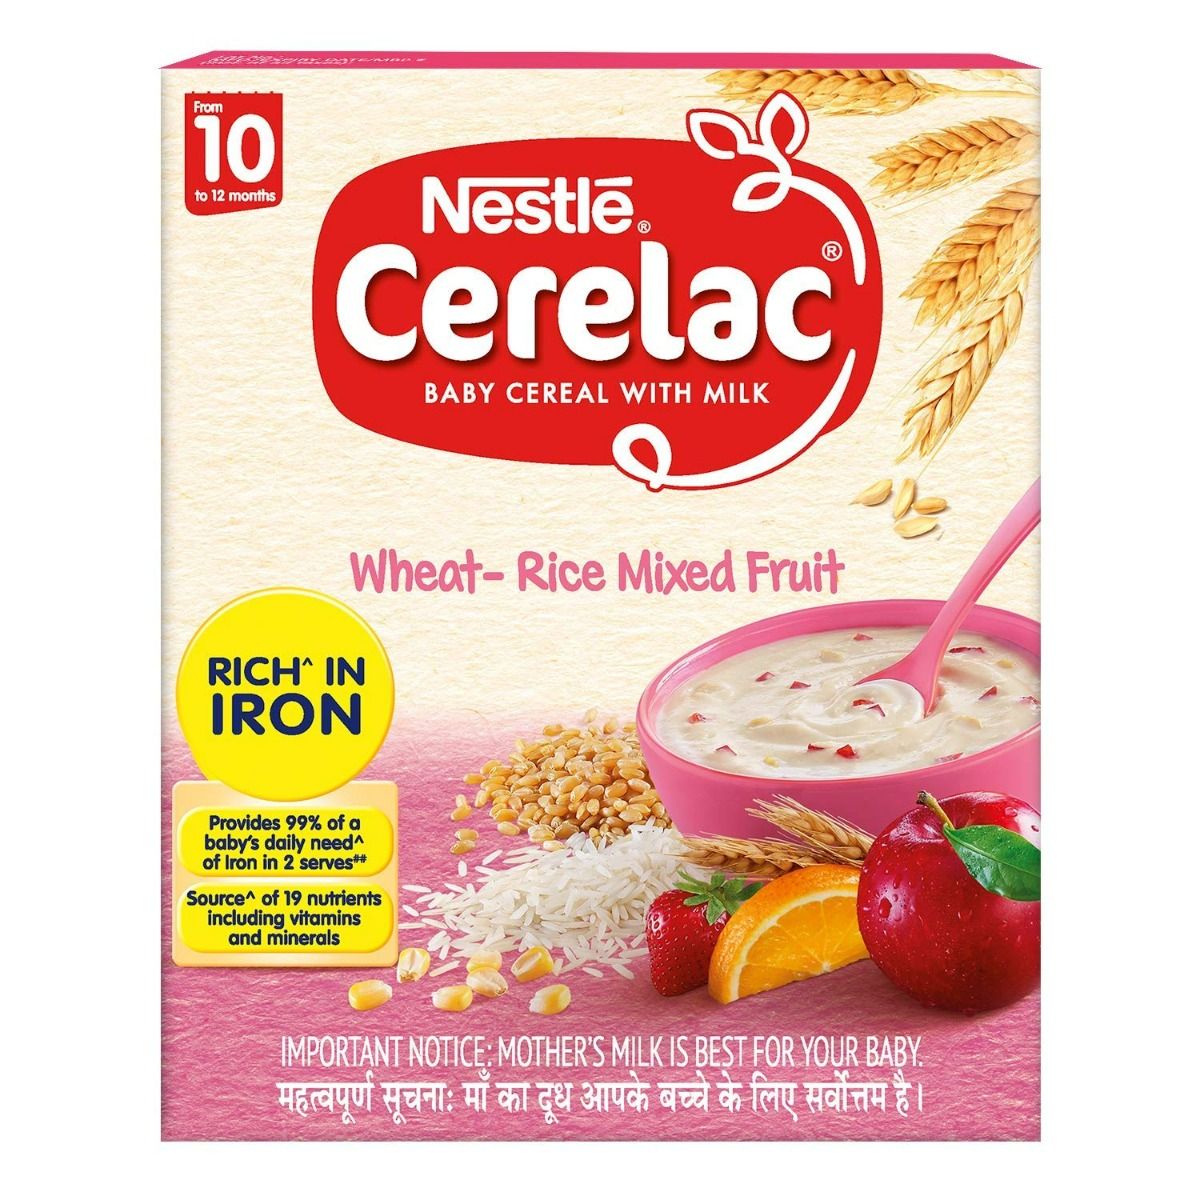 Buy Nestle Cerelac Baby Cereal with Milk Wheat Rice Mixed Fruit (From 10 to 12 Months) Powder, 300 gm Refill Pack Online